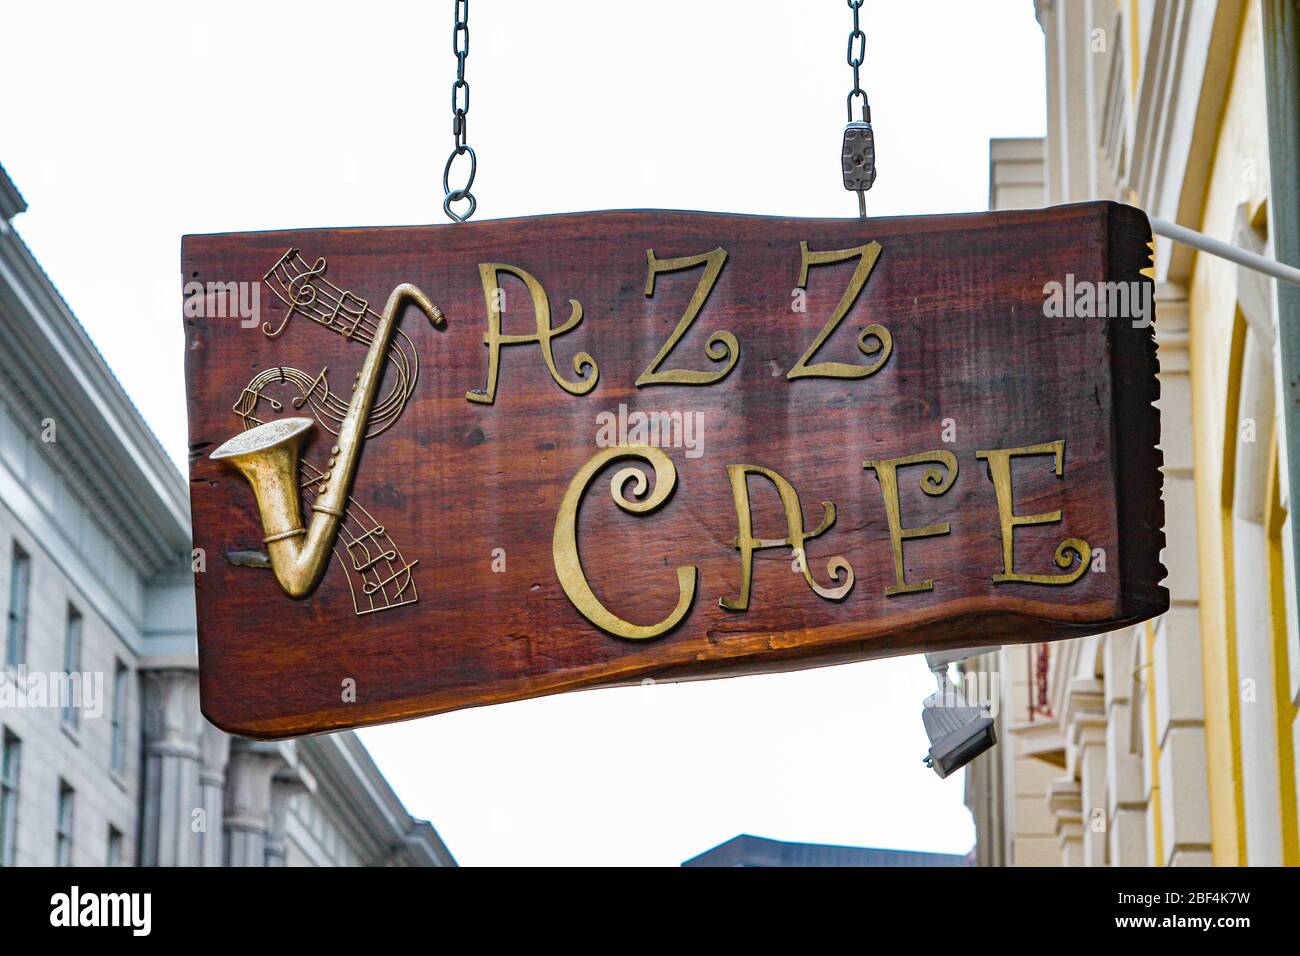 New Orleans, LA - March 27, 2016: A closeup of the sign outside of the Jazz Cafe on Decatur street in New Orleans. Stock Photo